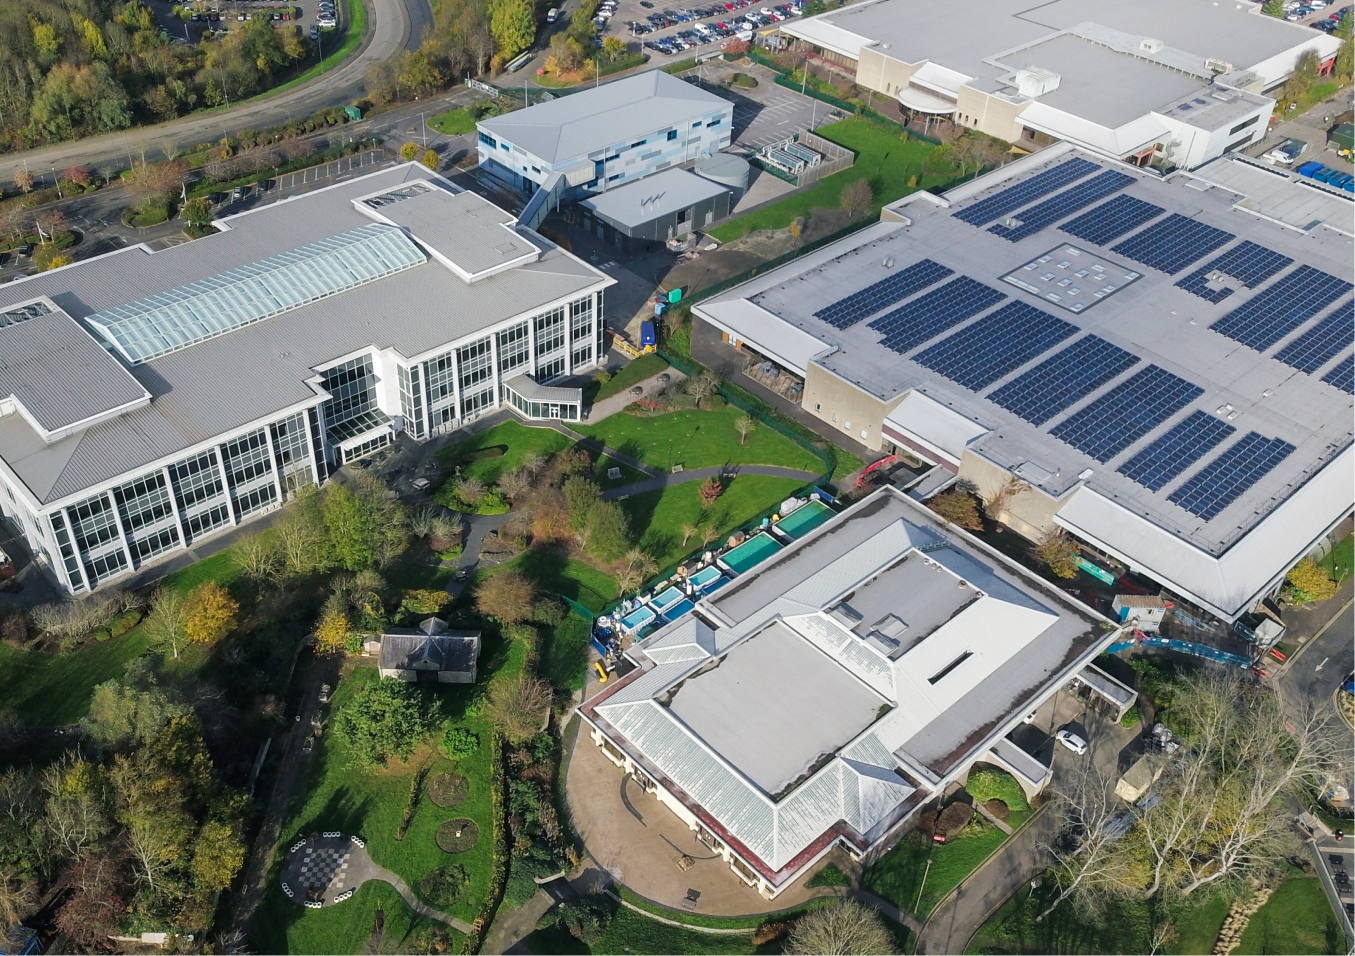 Aerial view of industrial campus with solar panels.